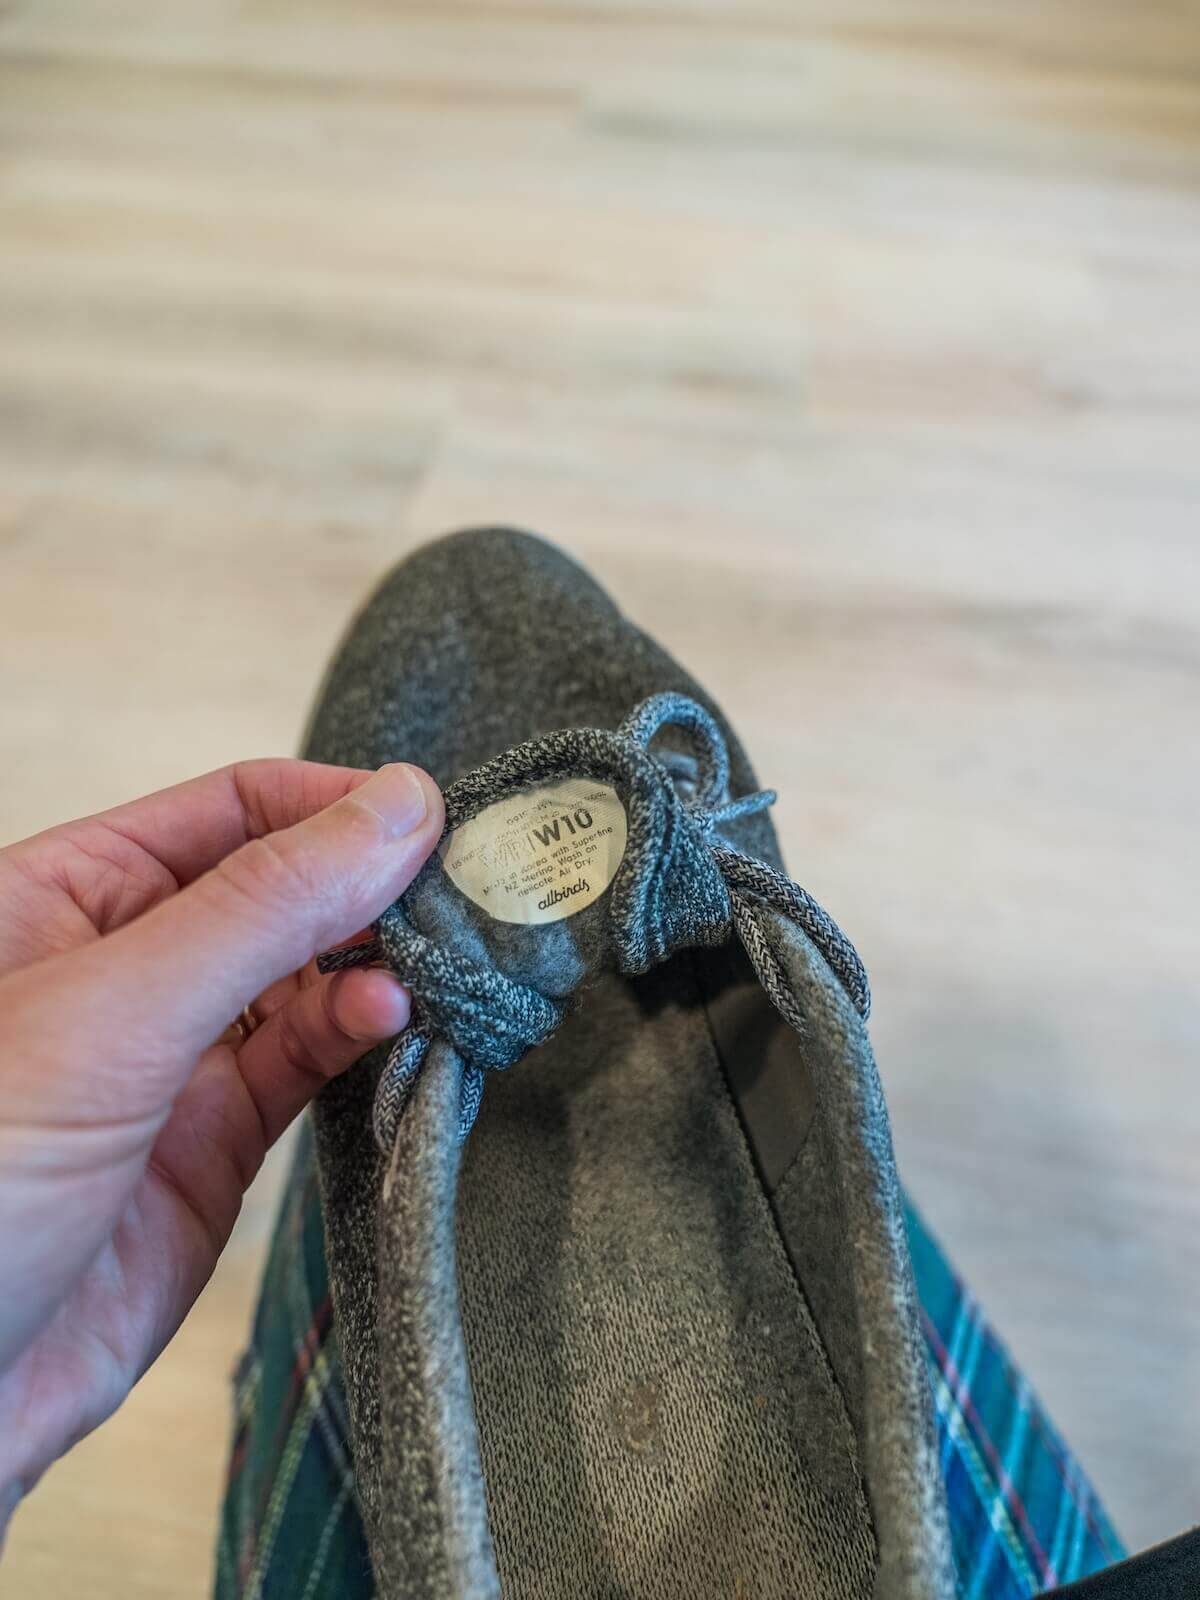 A hand pulls out the tongue of a grey sneaker to show the label, with a light hardwood floor behind it.